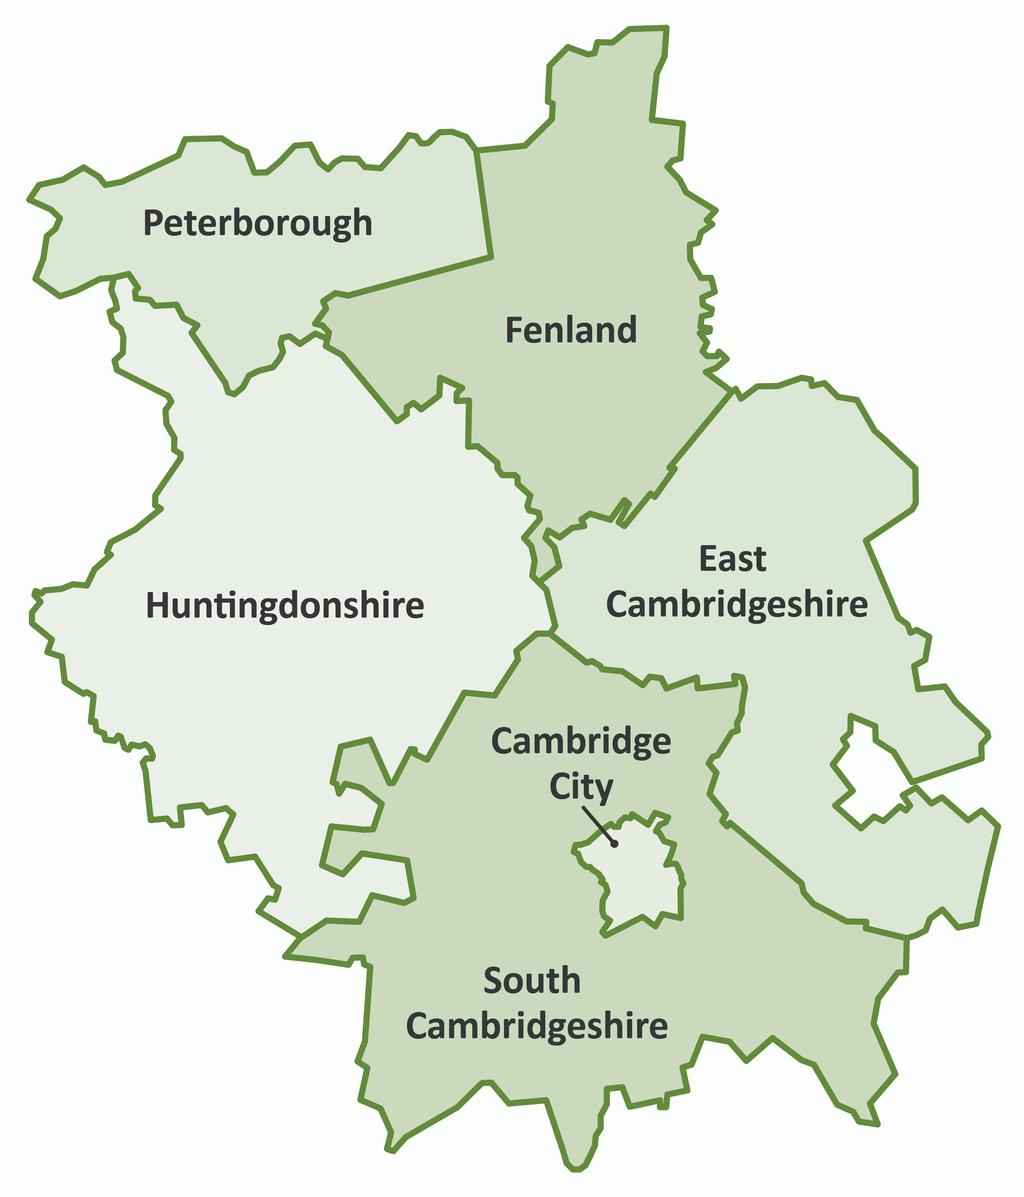 System Pressures Map of Cambridgeshire and Peterborough showing key pressures for each district: Lack of homecare provision in rural areas Lack of appropriate care facilities for younger adults with